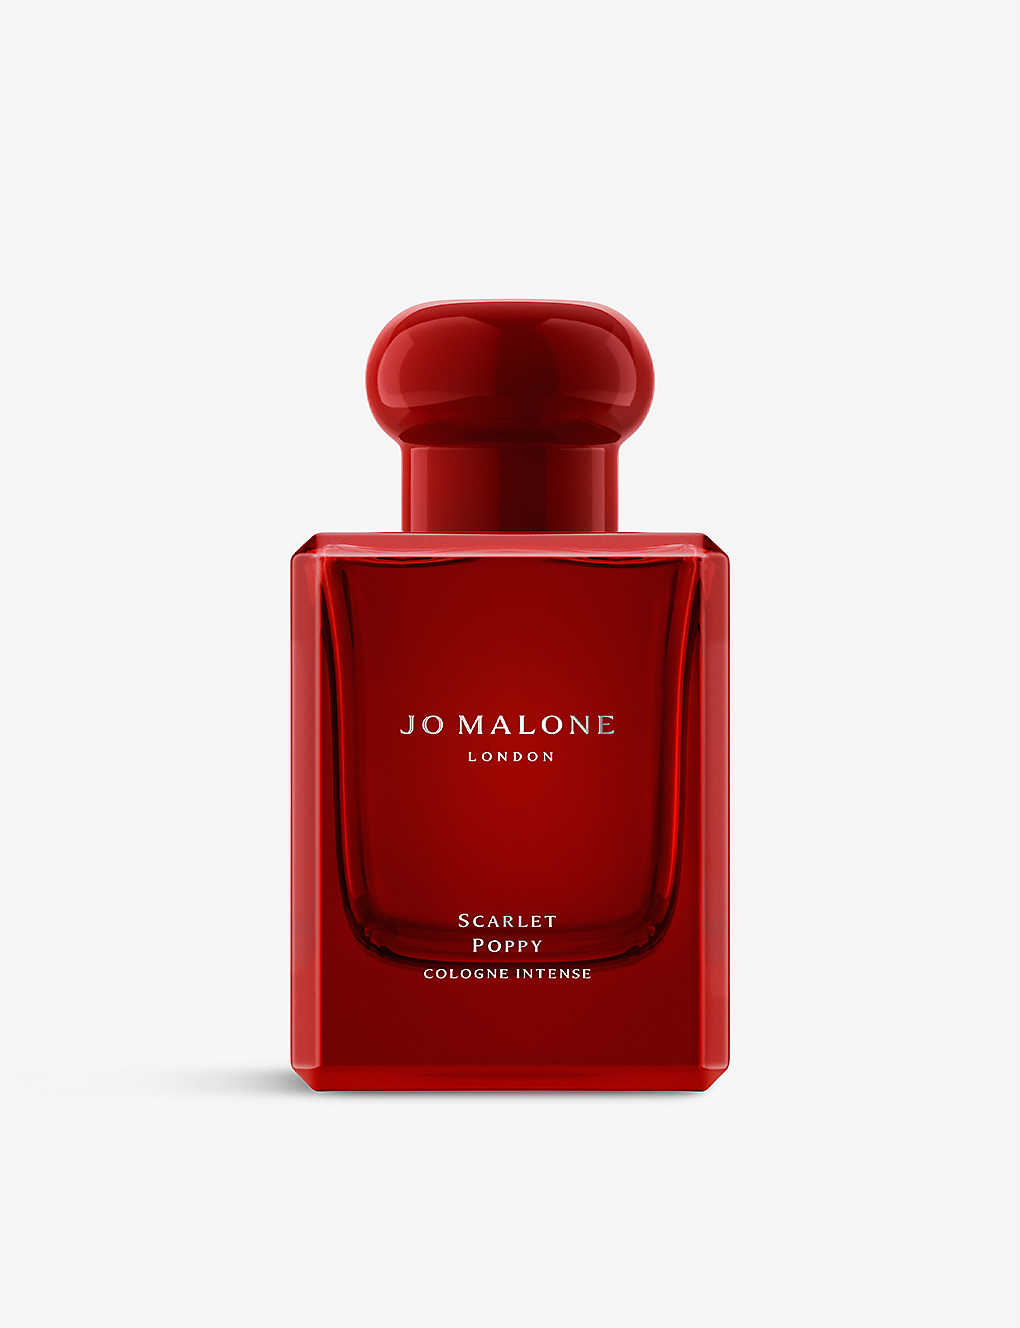 Perfume scents that make you feel happier - The Wellbeing Agent